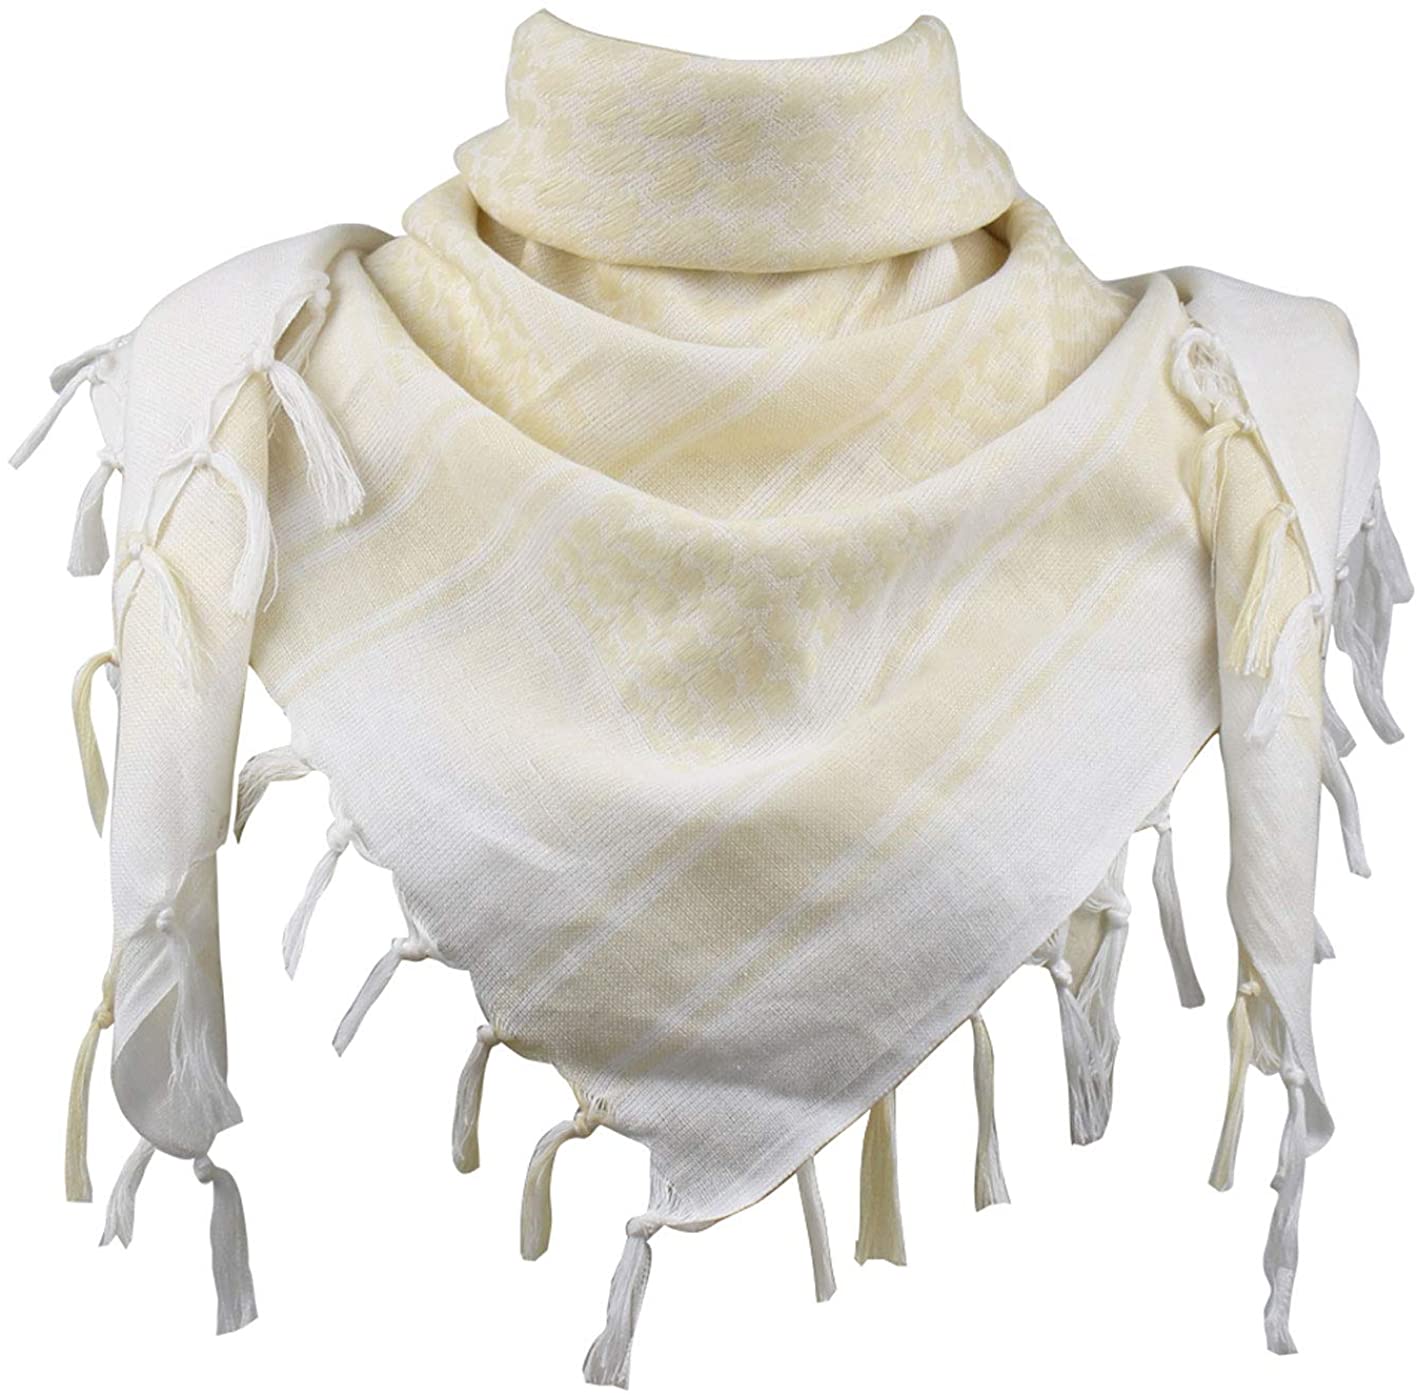 Explore Land Cotton Shemagh Tactical Desert Scarf Wrap 